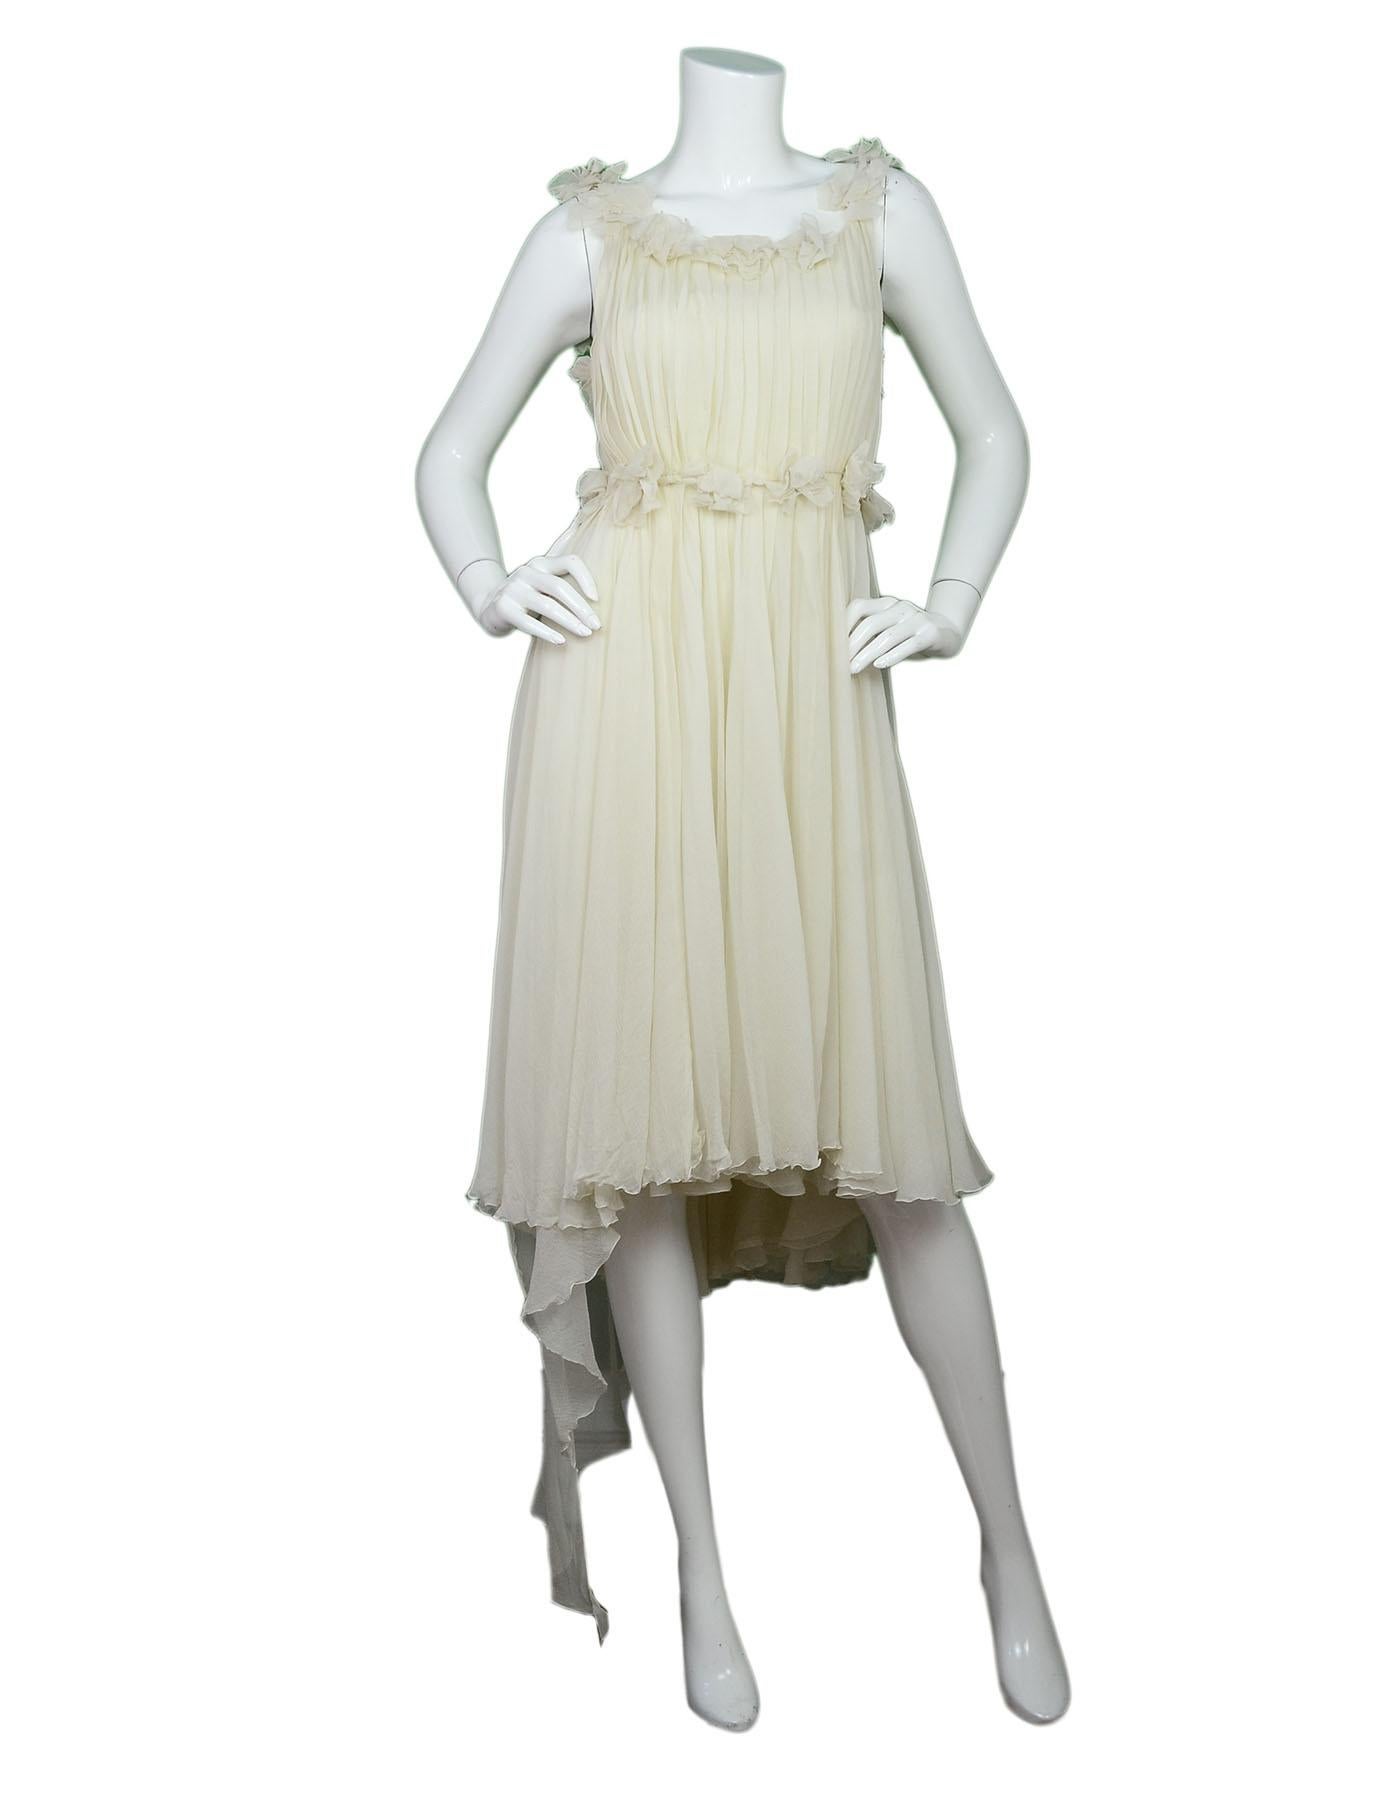 Chanel Cream Silk Chiffon Dress with Mesh Rosettes Sz FR38

Made In: France
Year Of Production: 2003
Color: Cream
Composition: 100% silk
Lining: Silk lining
Closure/Opening: Back zip closure
Exterior Pockets: None
Interior Pockets: None
Overall